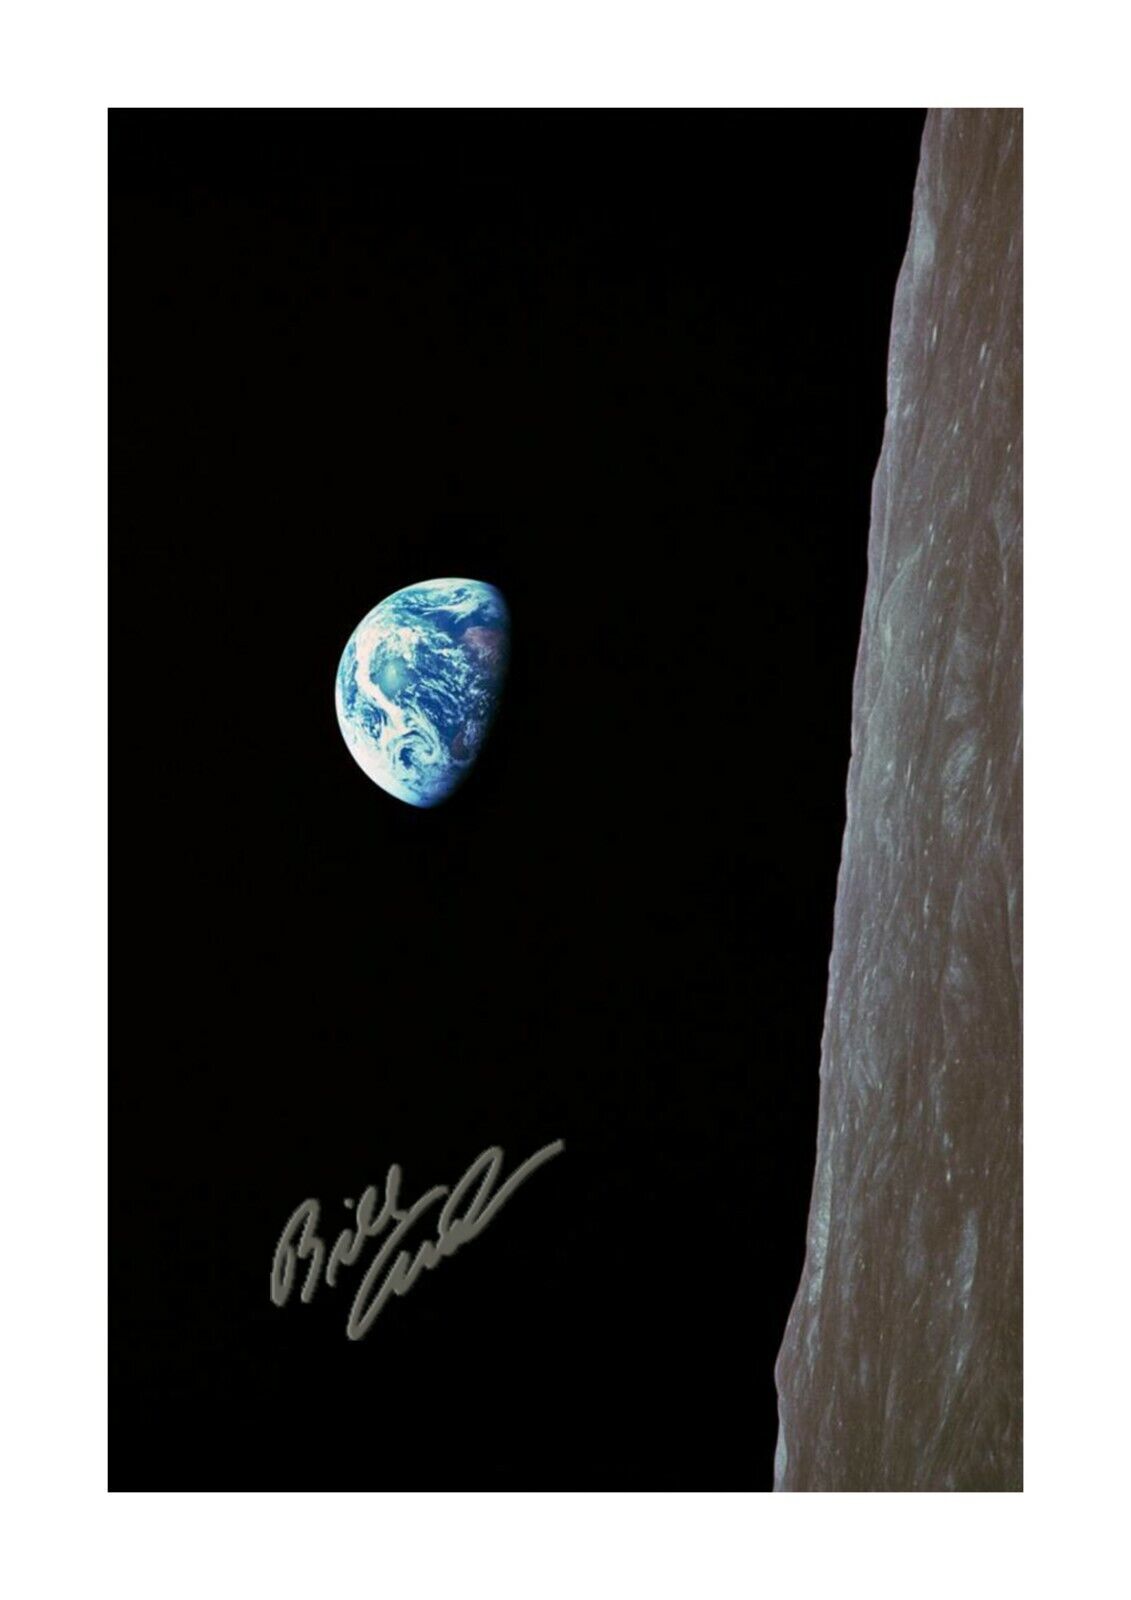 Earthrise by Bill Anders Apollo 8 A4 signed picture poster and choice of frame.